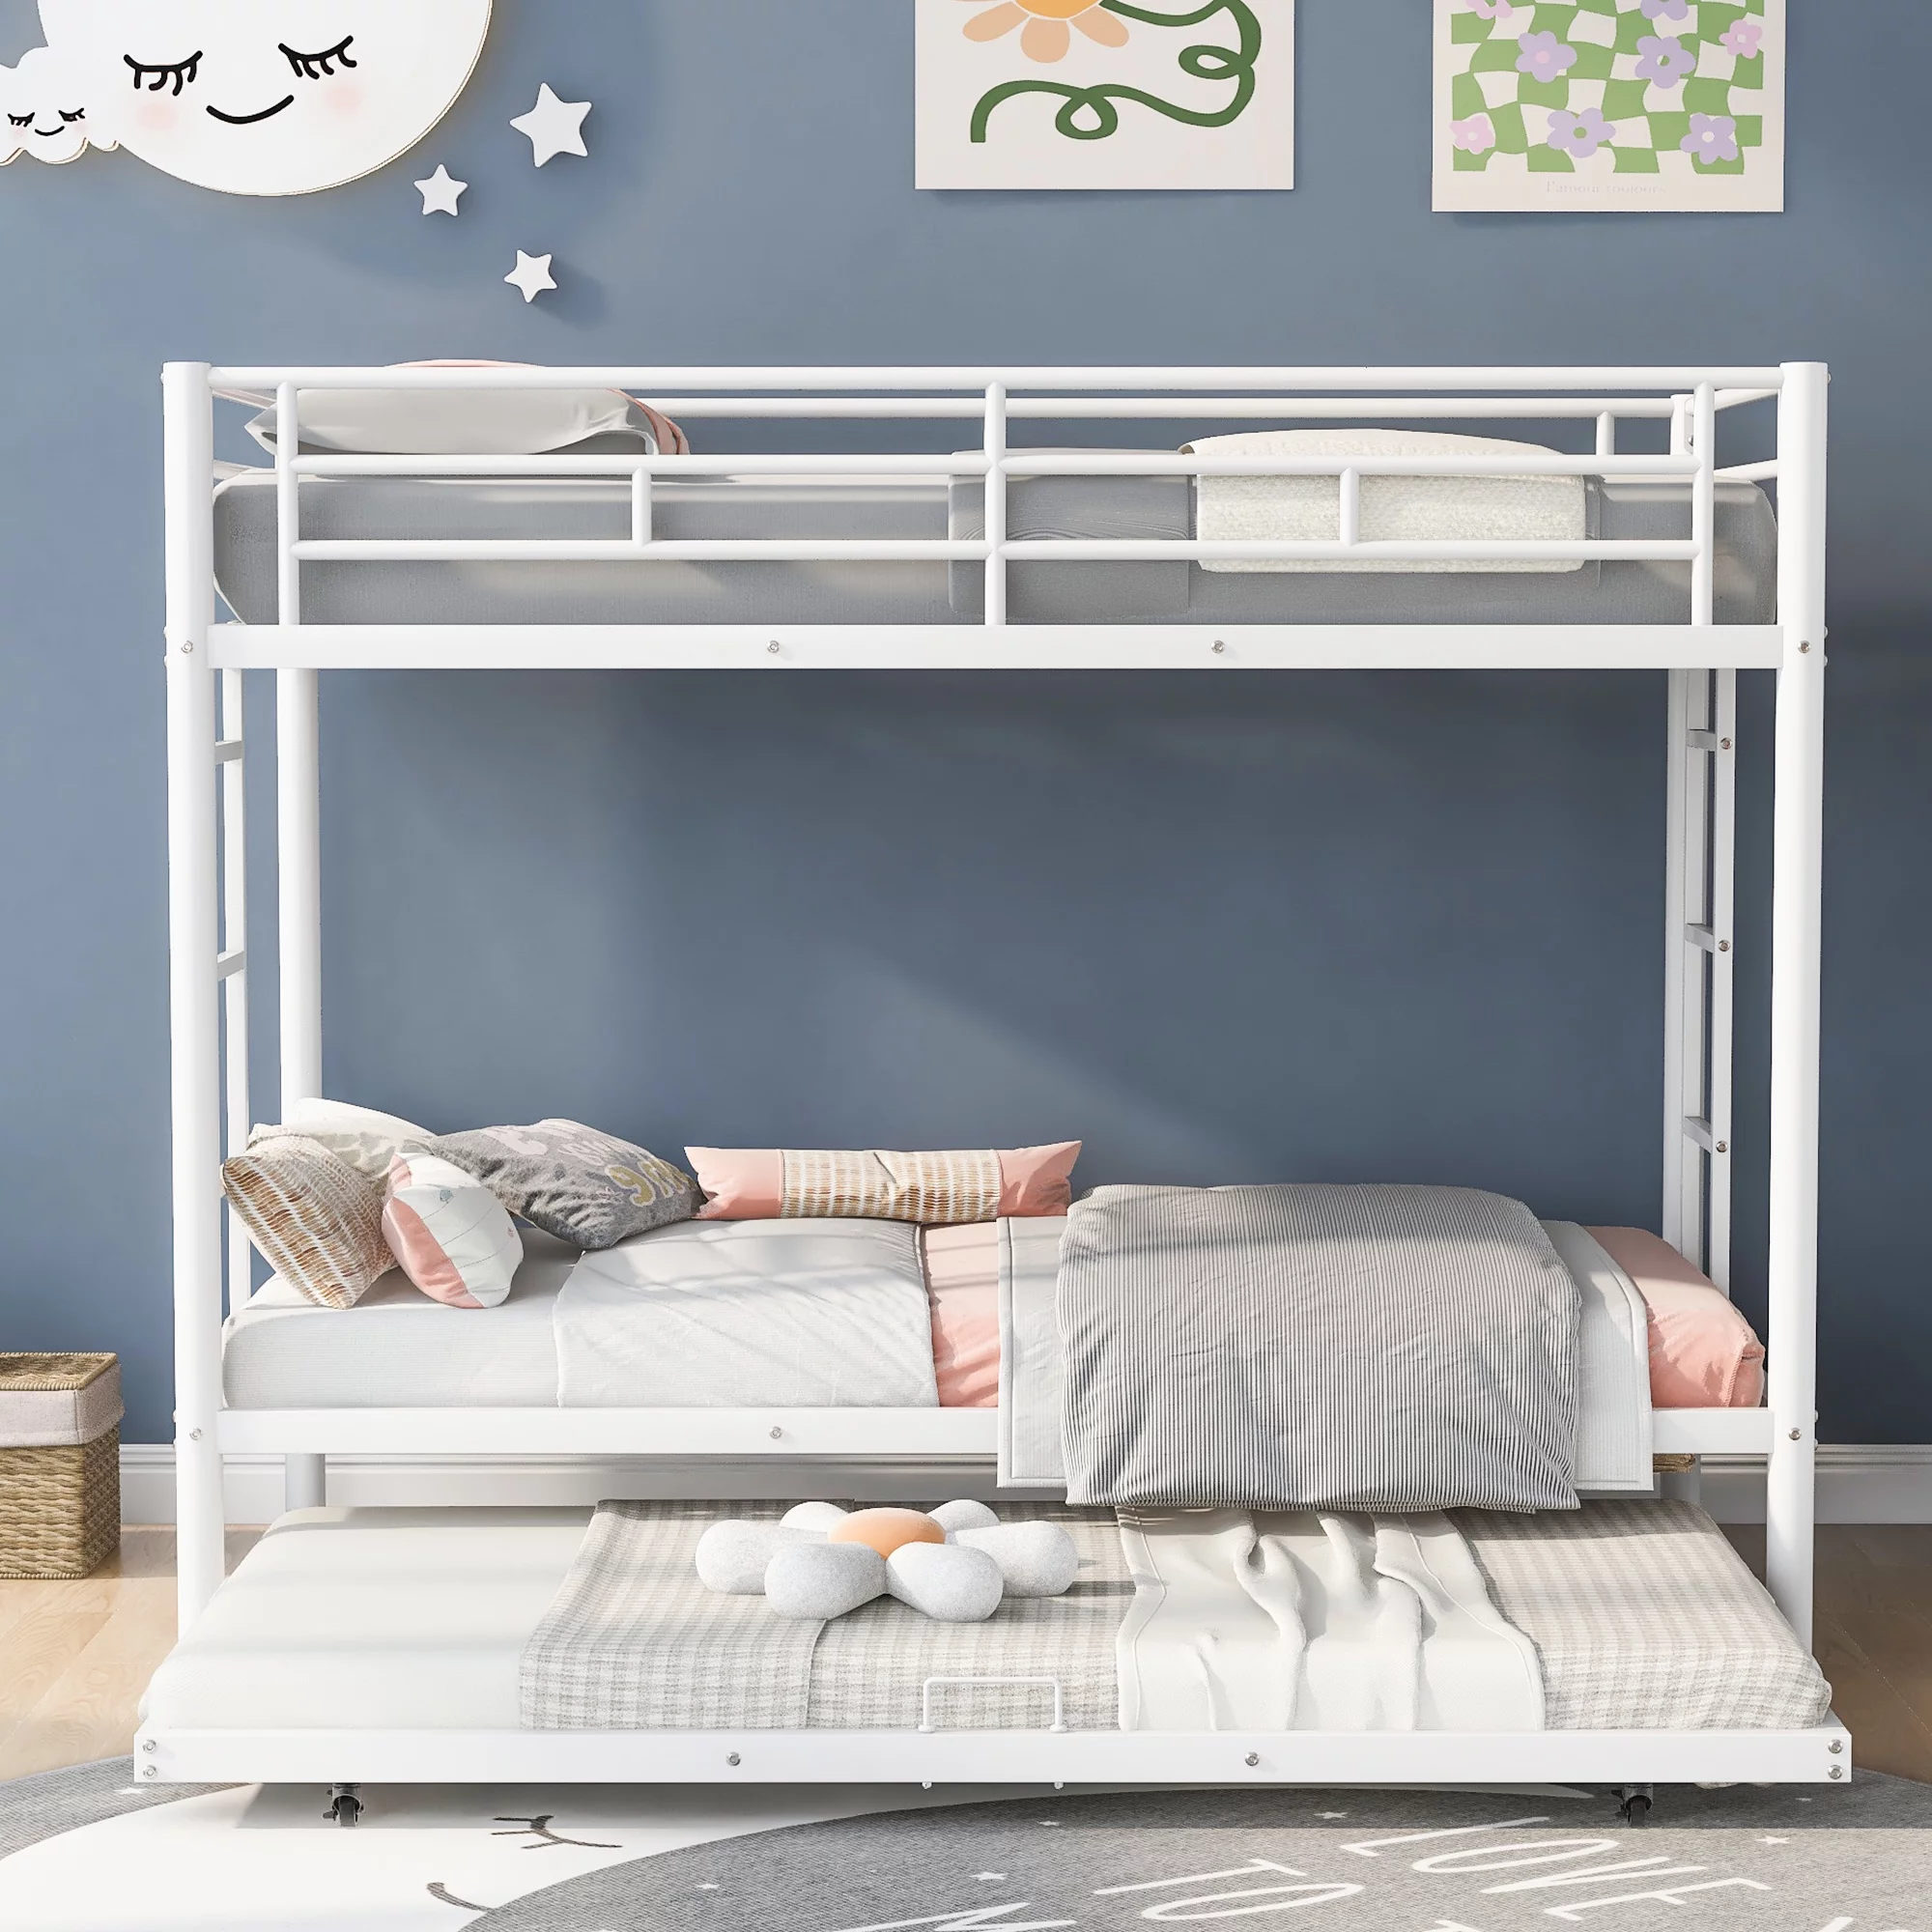 KOFUN Metal Bunk Beds for 3, Twin over Twin Bunk Bed with Trundle, Heavy Duty Bunk Bed for Kids Teens Adults, Twin Bunk Bed with 2 Side Ladders and Safety Guard Rails, No Box Spring Needed, White